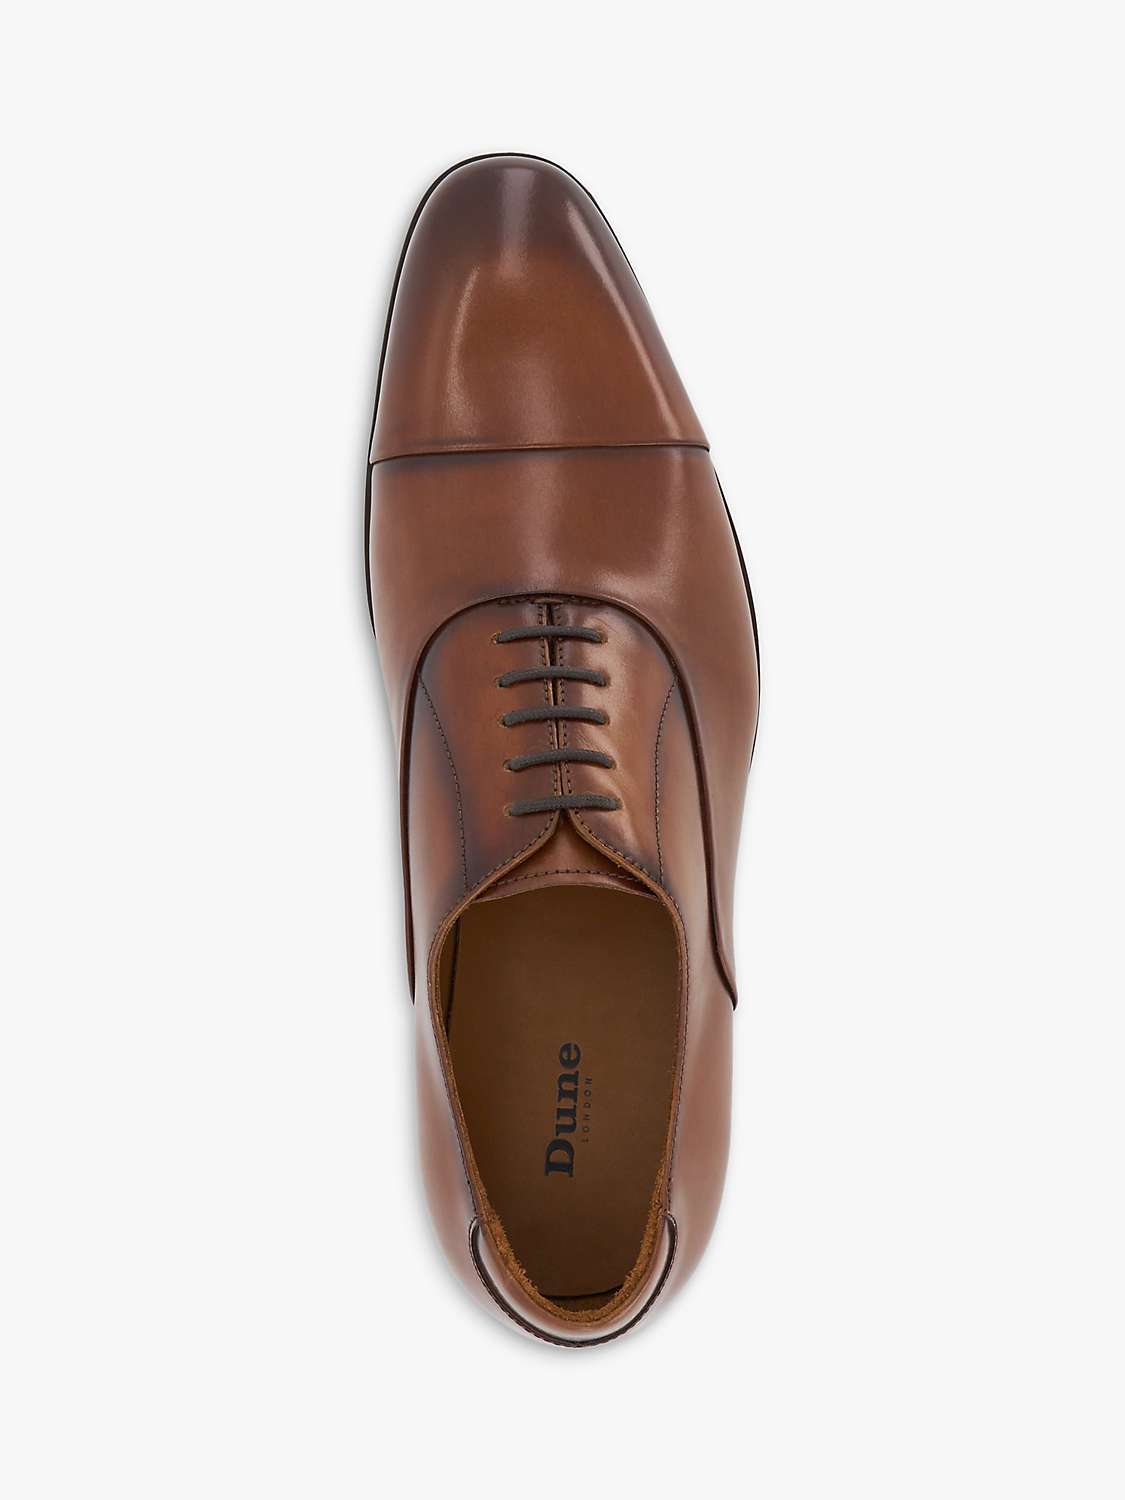 Dune Secrecy Leather Oxford Shoes, Dark Tan-leather at John Lewis ...